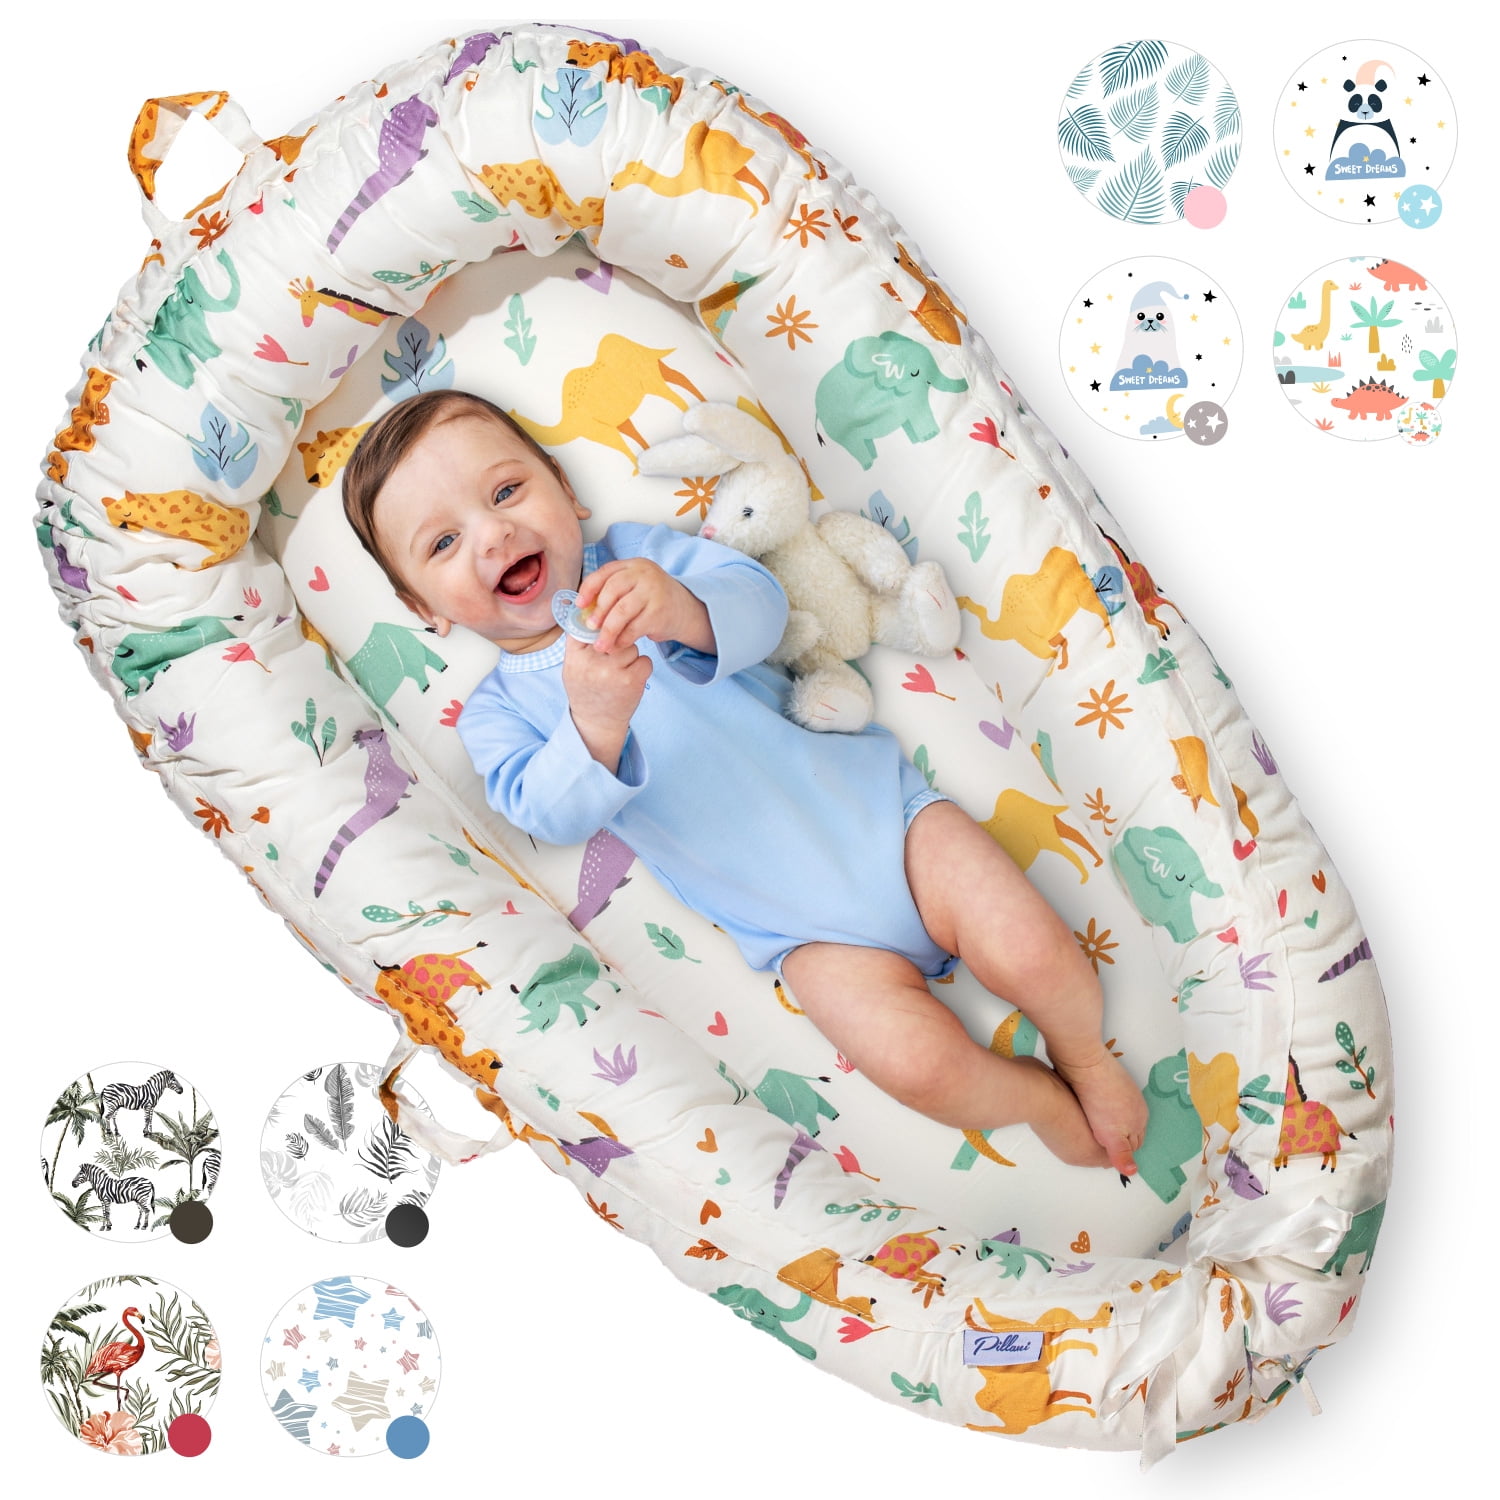 Baby Lounger Pillow - Newborn Lounger for 0-12 Months, Breathable &  Portable Infant Lounger Pillow - Adjustable Cotton Soft Baby Floor Seat for  Travel, Baby Newborn Essentials Must Haves 